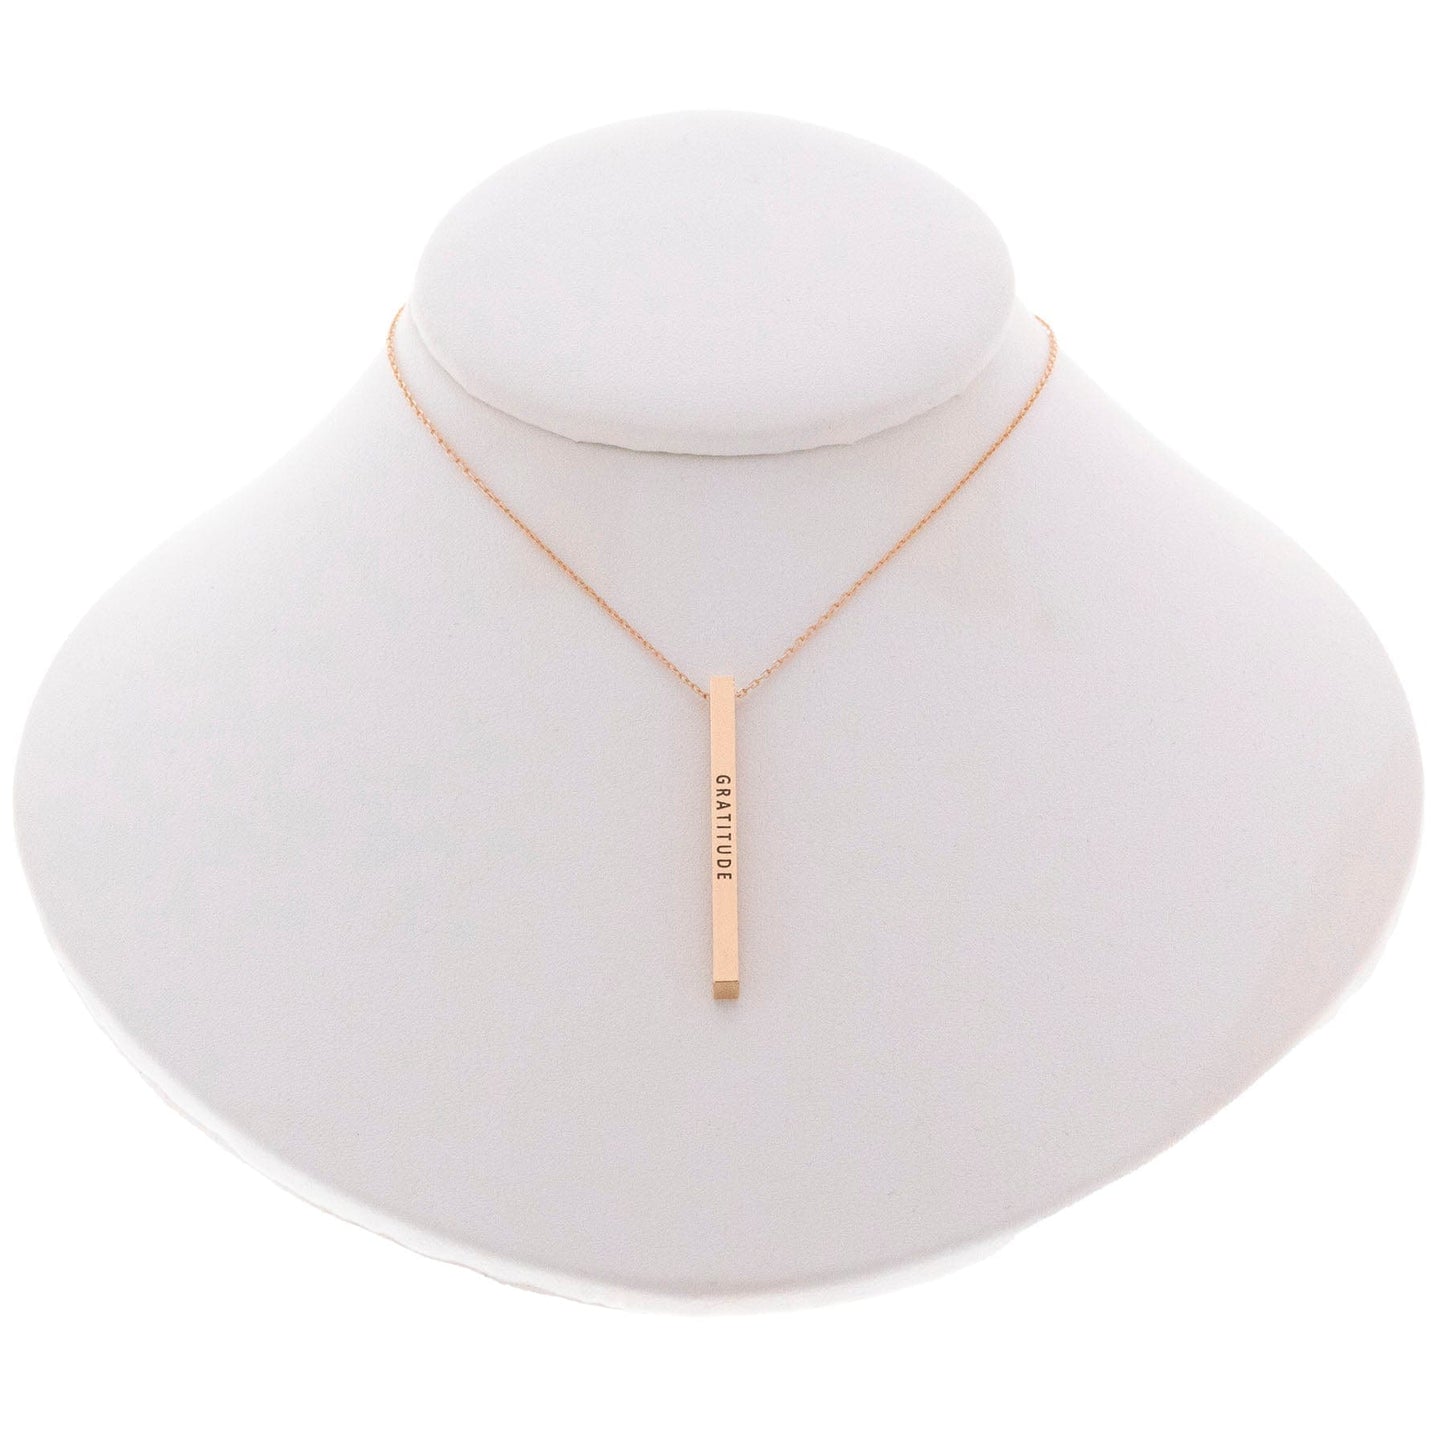 "Gratitude" Bar Necklace By Recovery Matters Rose Gold